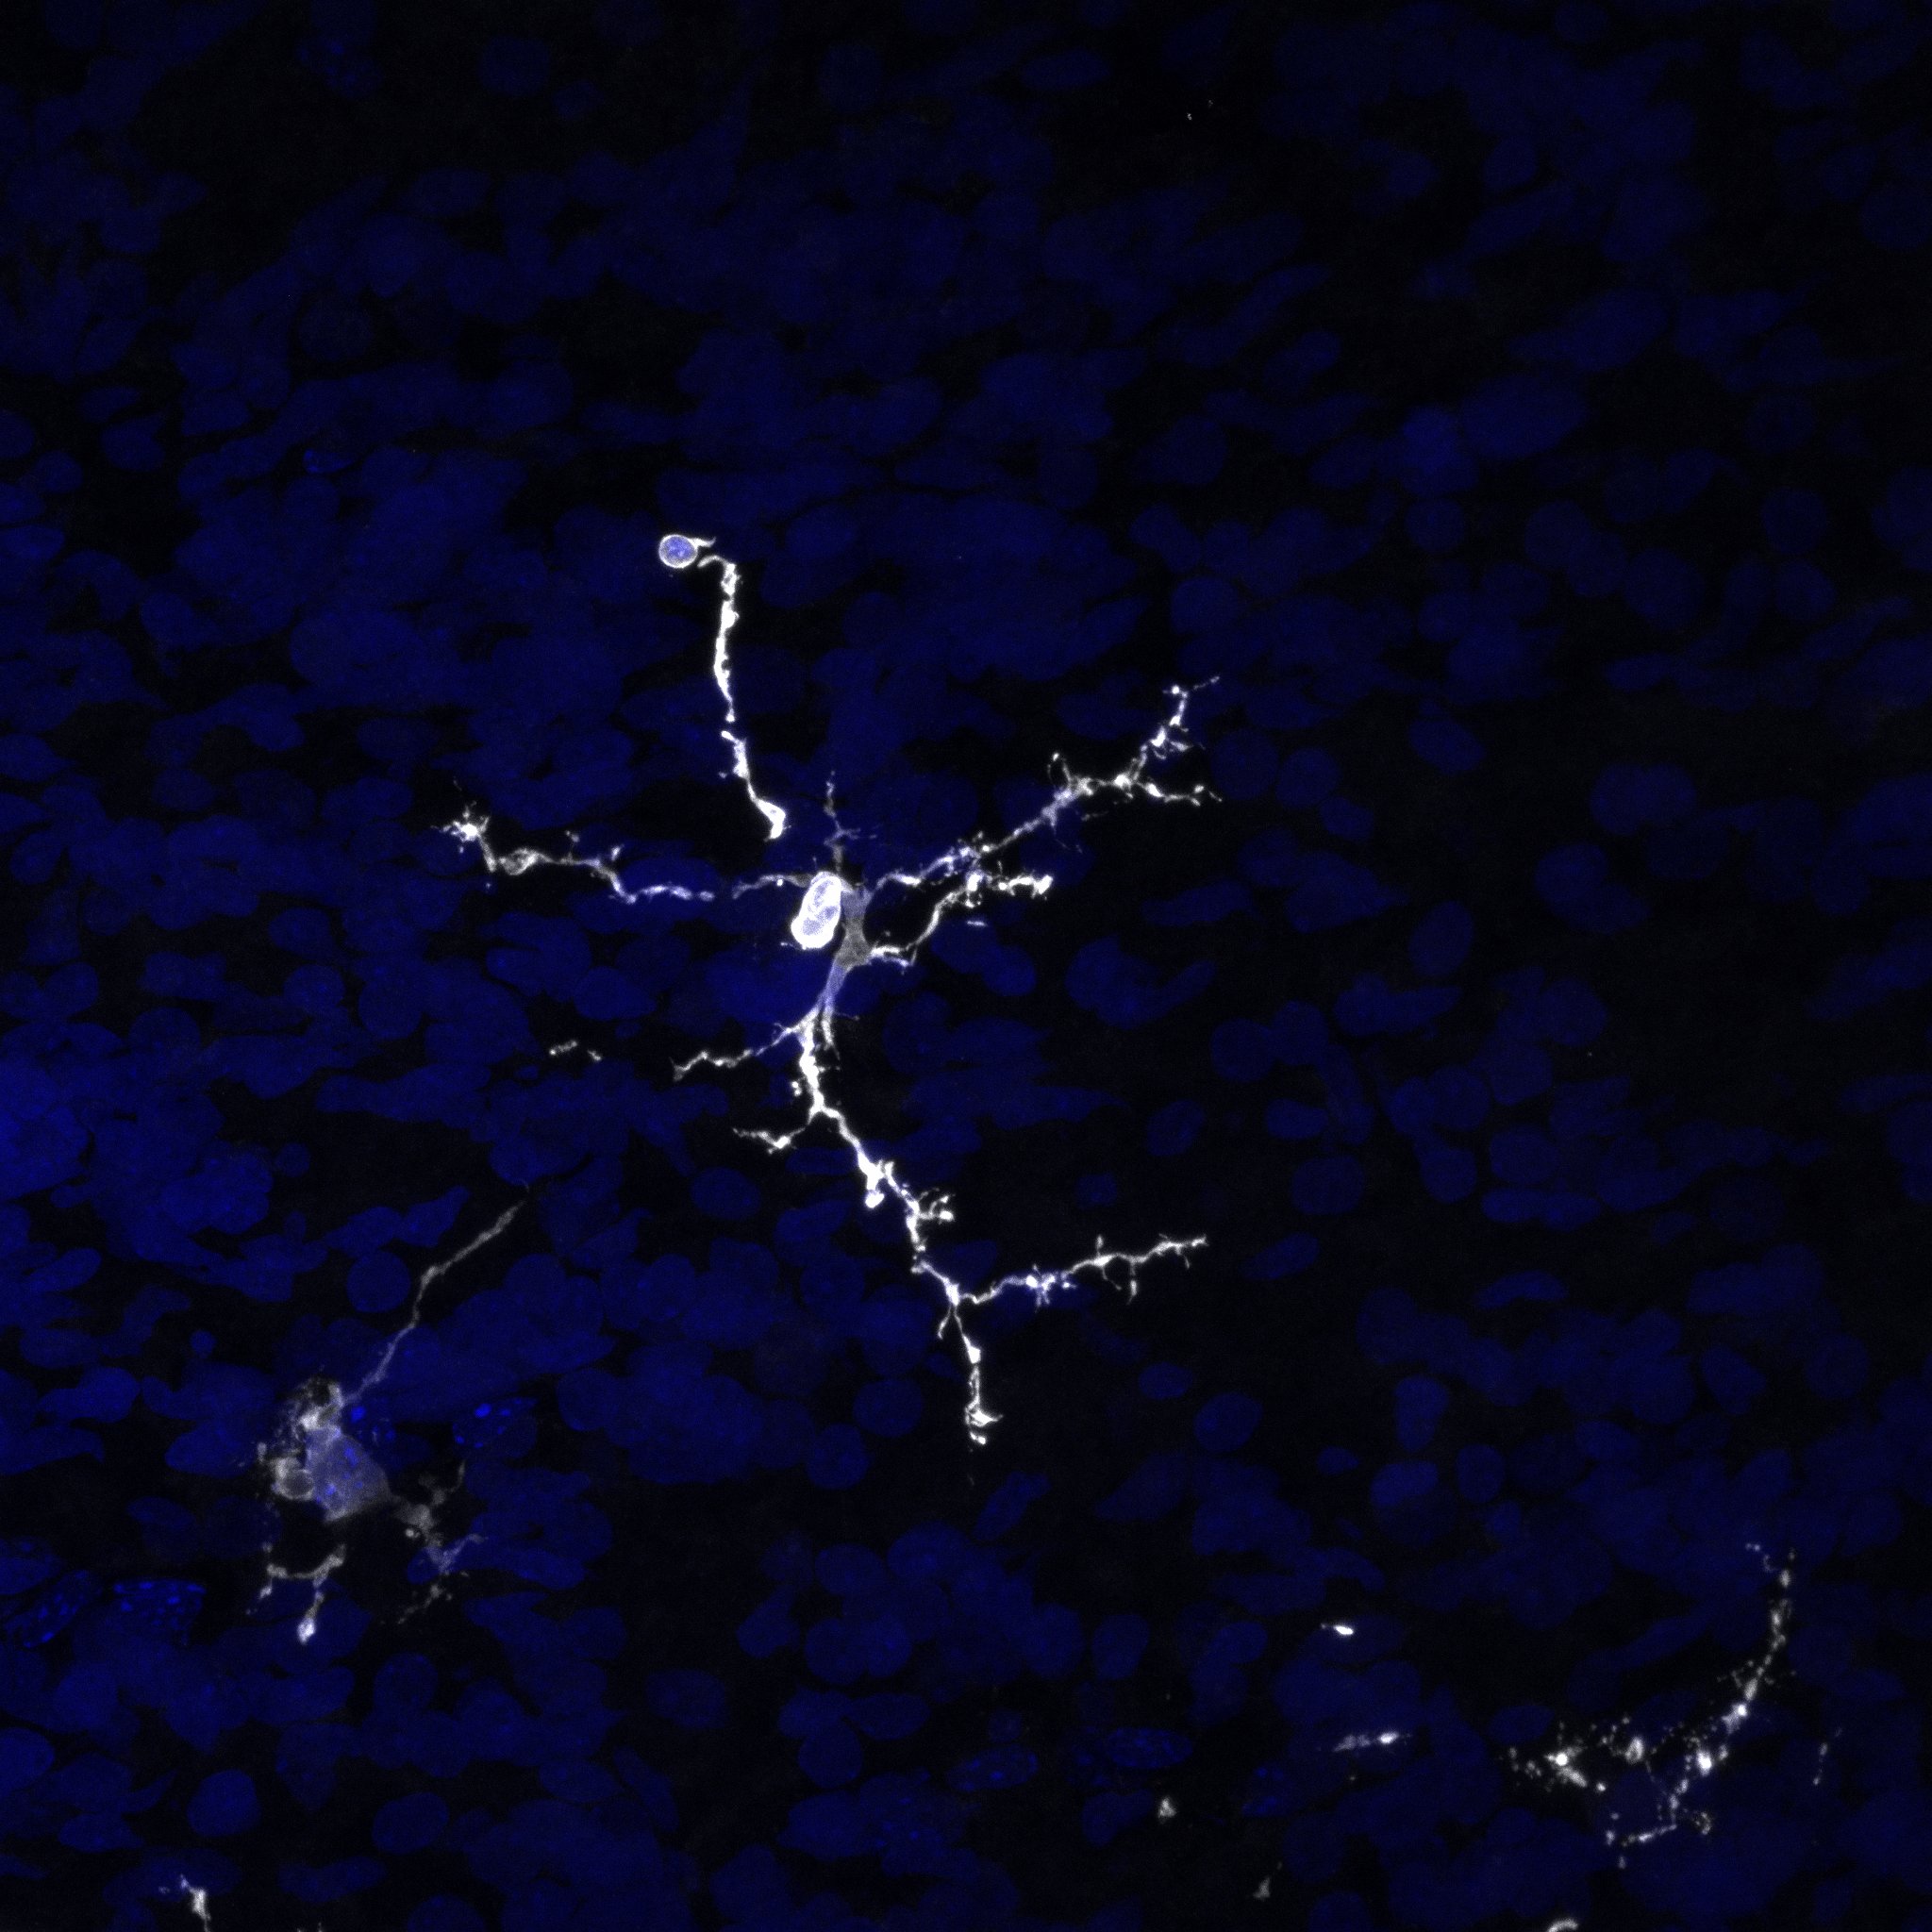 Human iPSC-derived microglia (white) residing within an in vivo brain-like organoid environment (blue) derived using HumanKine growth factors (TGF beta 1- HZ-1011, BMP4- HZ-1045, and Thrombopoietin HZ-1248).(Credits- Credit: Simon T. Schafer & Monique Pena, Technical University of Munich, Center for Organoid Systems)